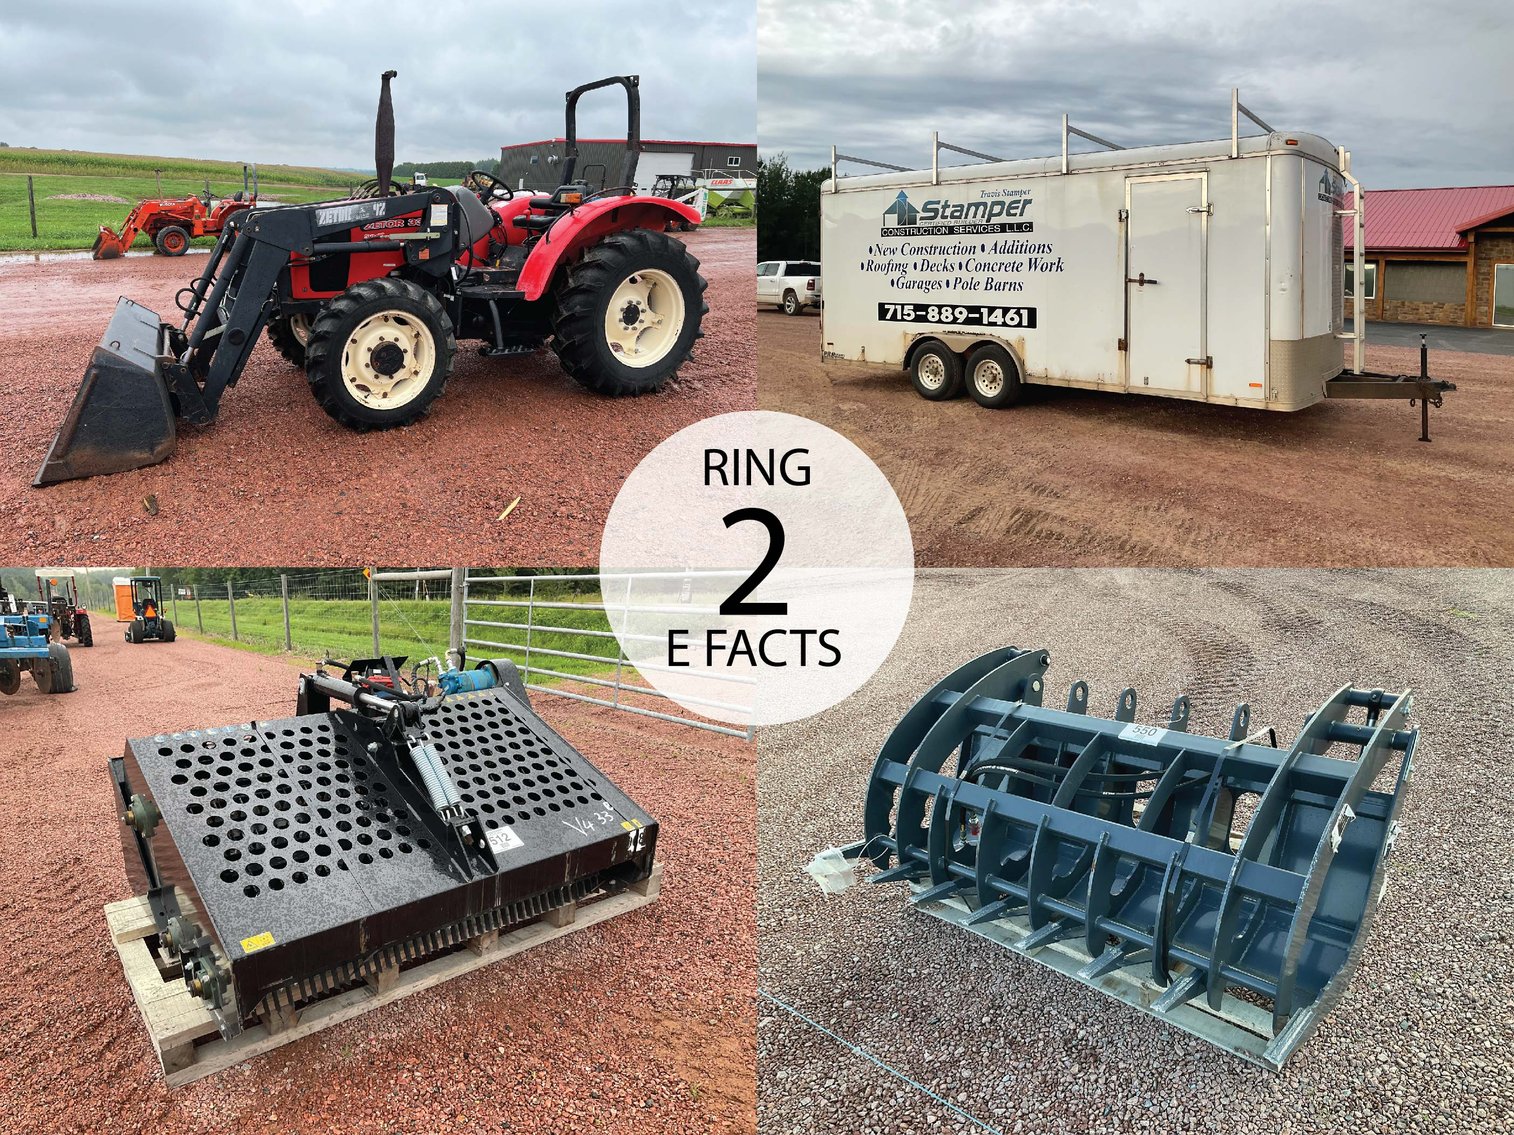 Annual Fall Equipment Auction: Ring 2 Equipment Facts